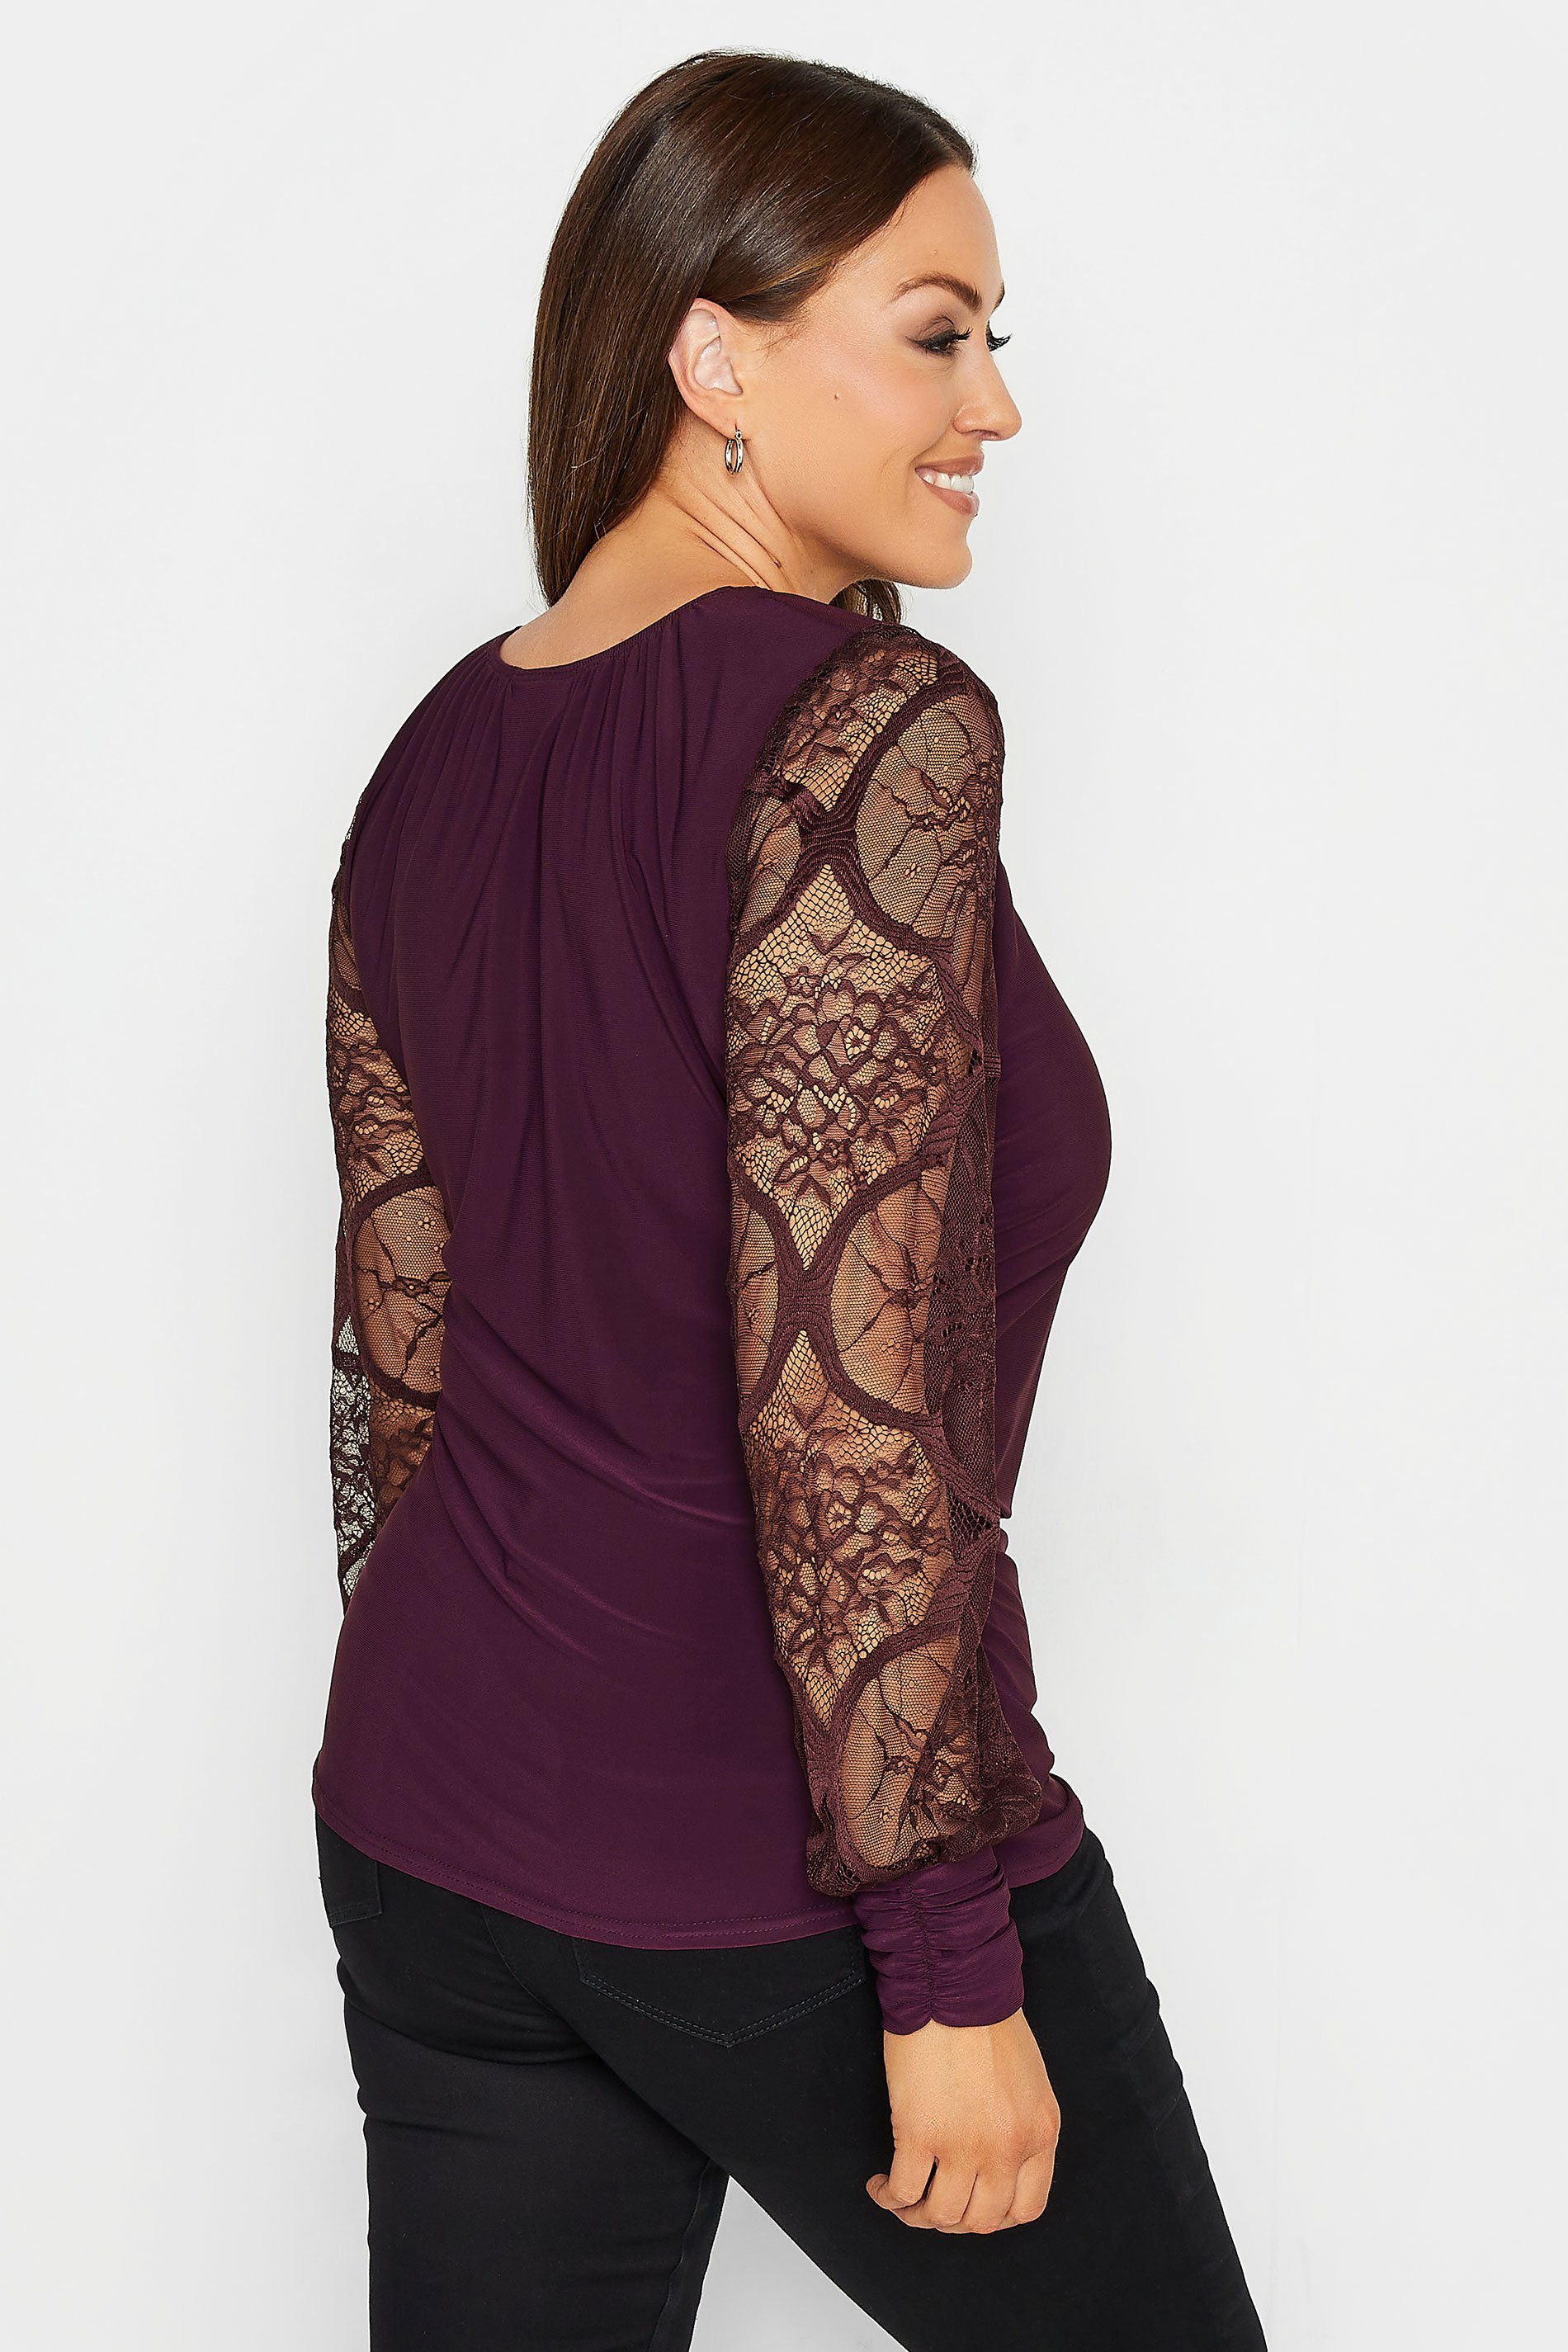 UO Nikko Lace Long Sleeve Top